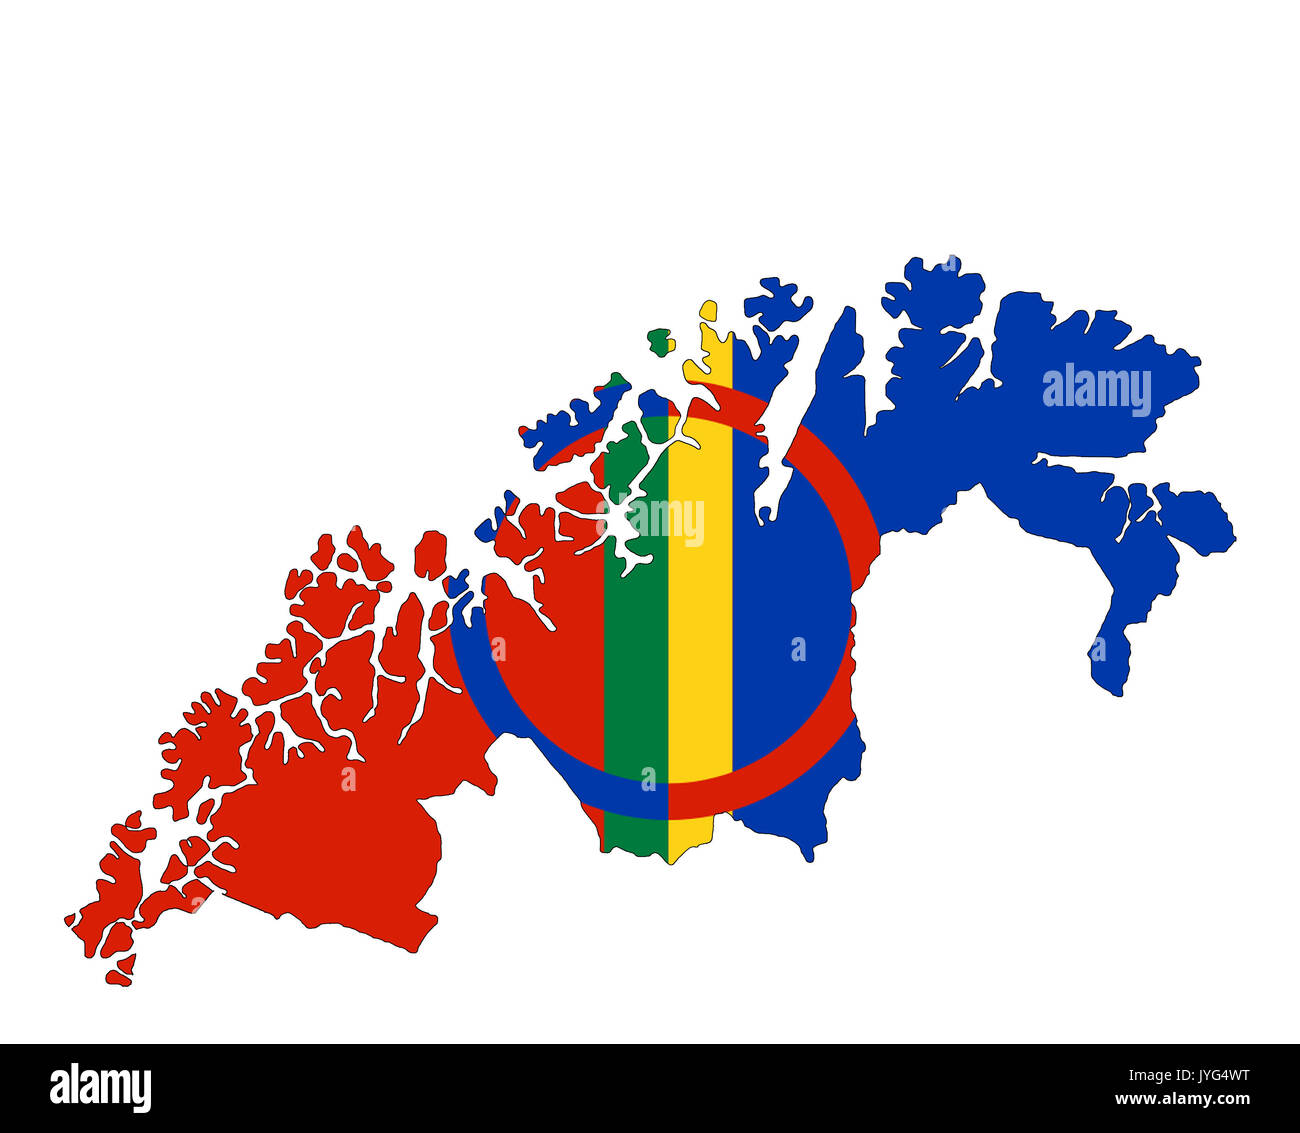 Finnmark and Troms county map merged Stock Photo